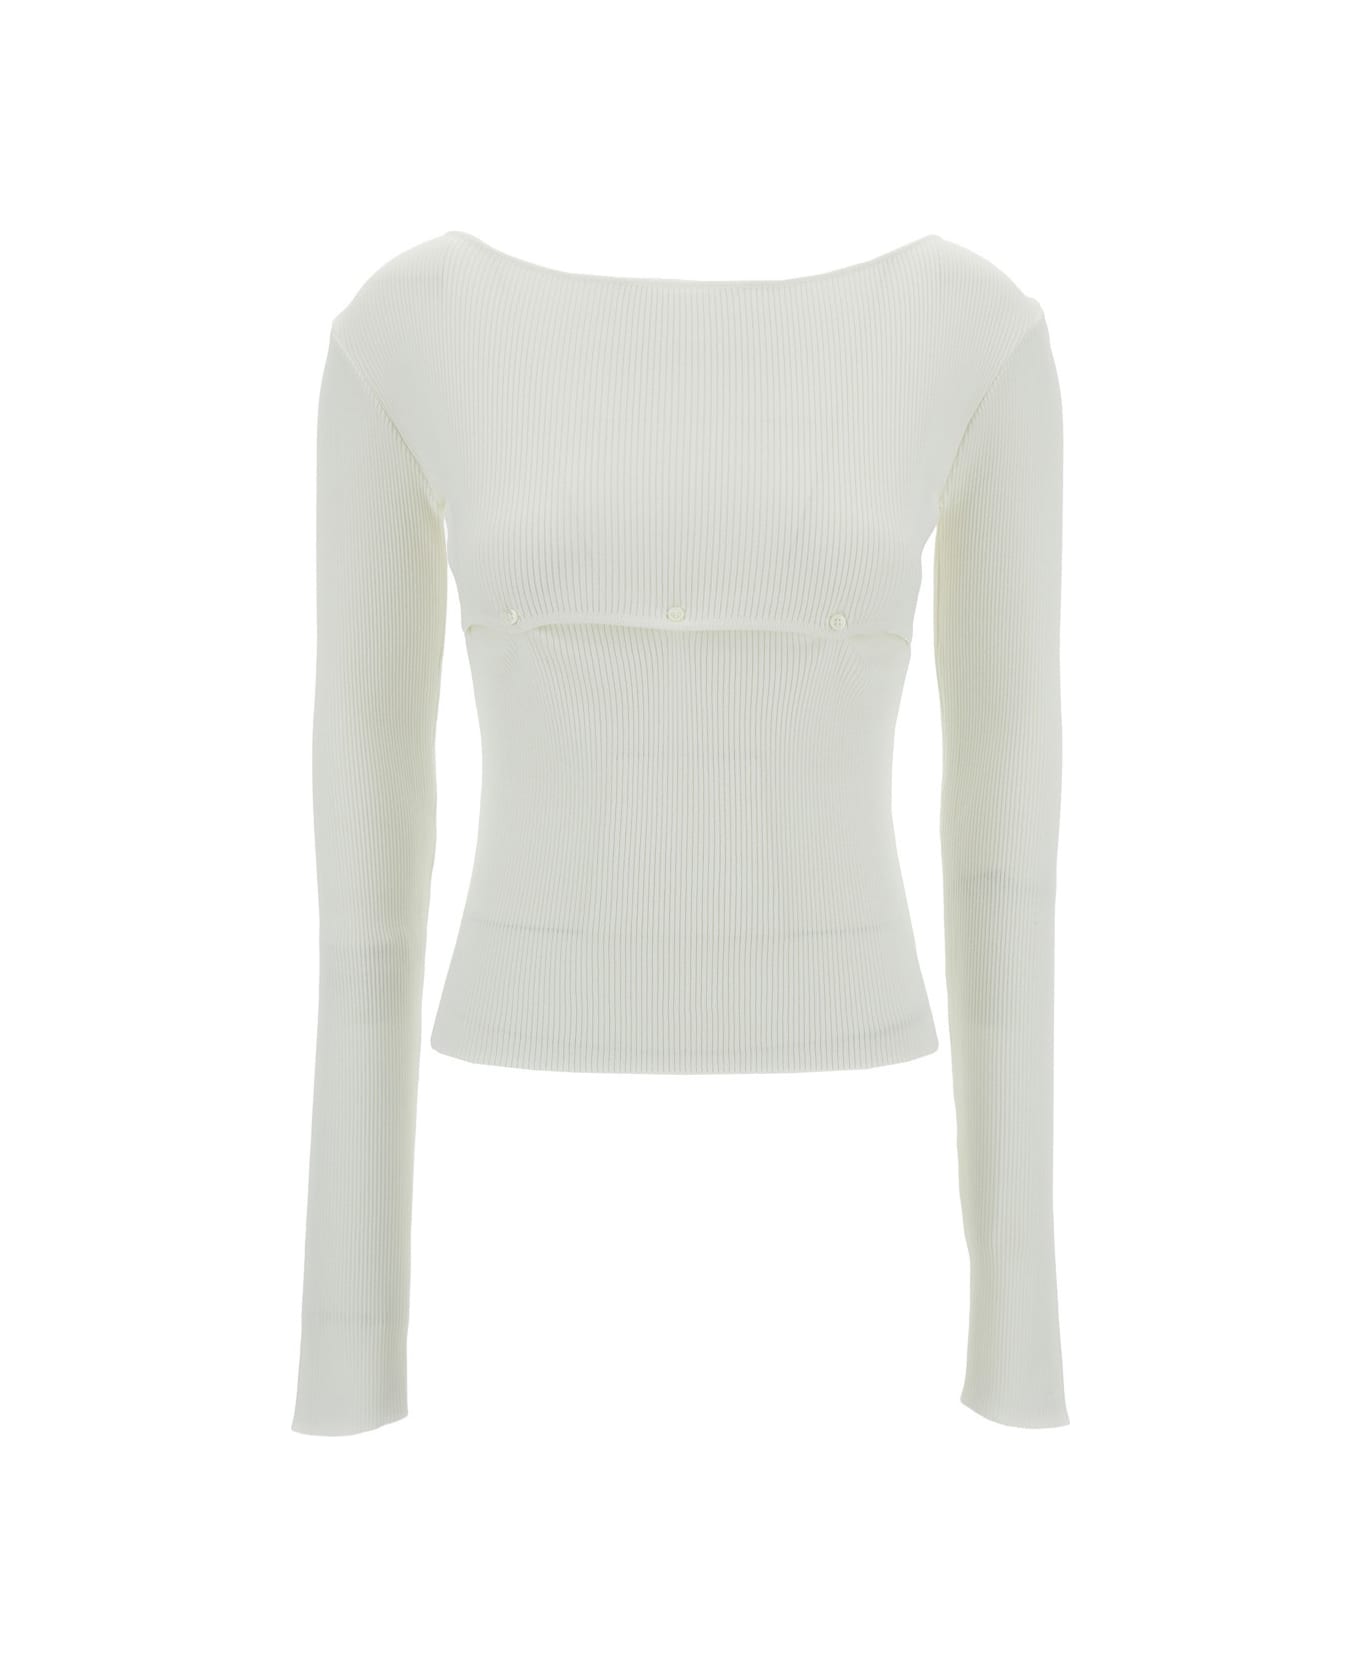 Low Classic White Ribbed Top With Boat Neckline And Buttons In Rayon Blend Woman - White